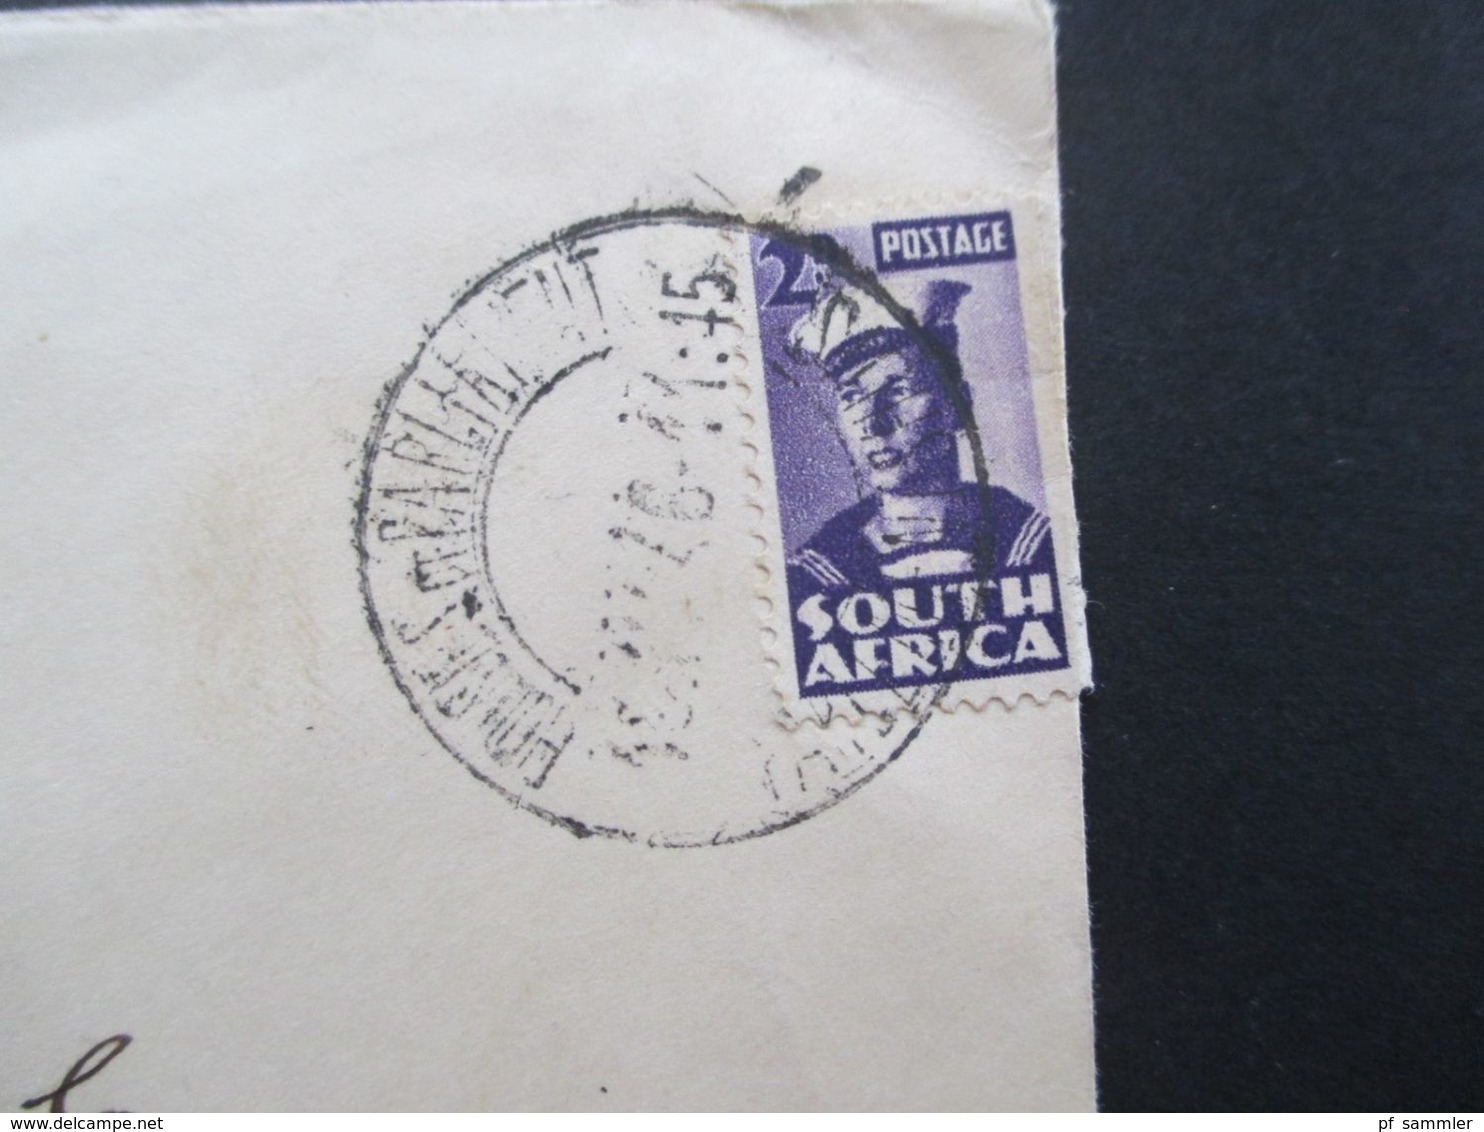 Südafrika 1945 ?!? Beleg Mit Wappen House Of Assembly Cape Town Und Stempel Houses Of Parliament - Lettres & Documents